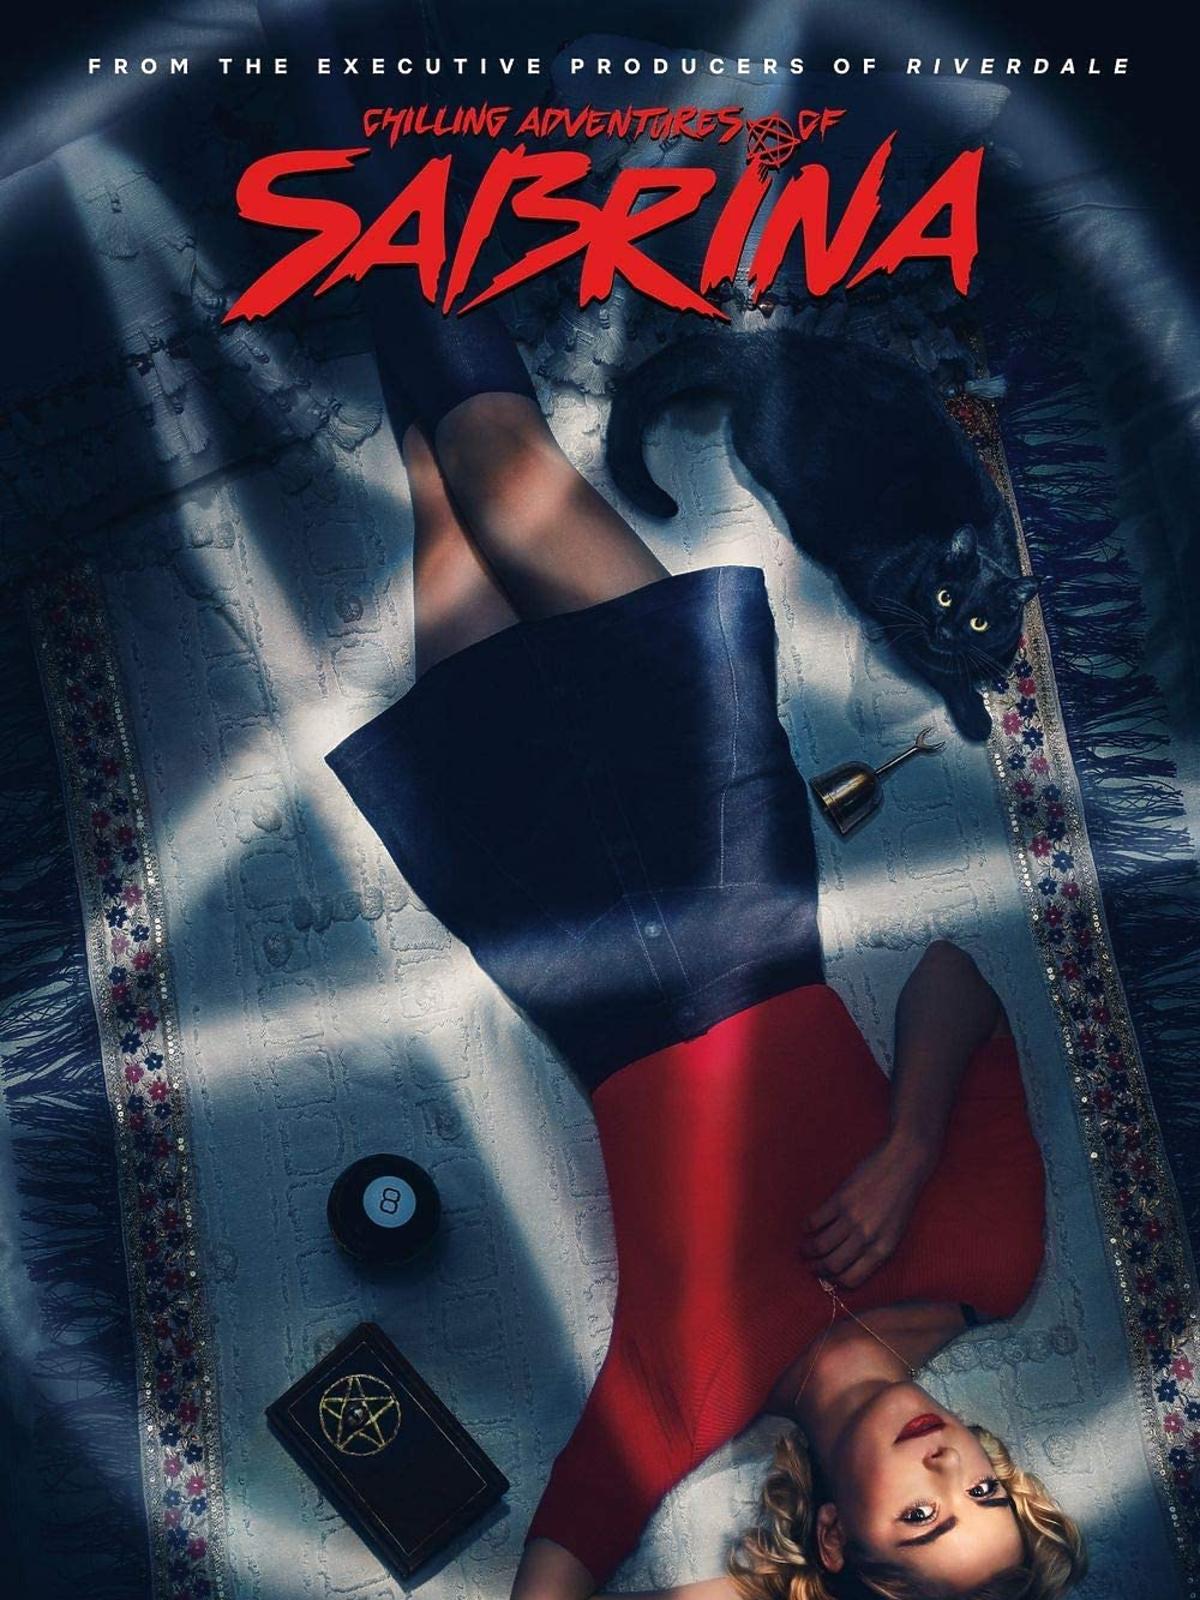 Filmy i seriale na Halloween - Chilling Adventures of Sabrina